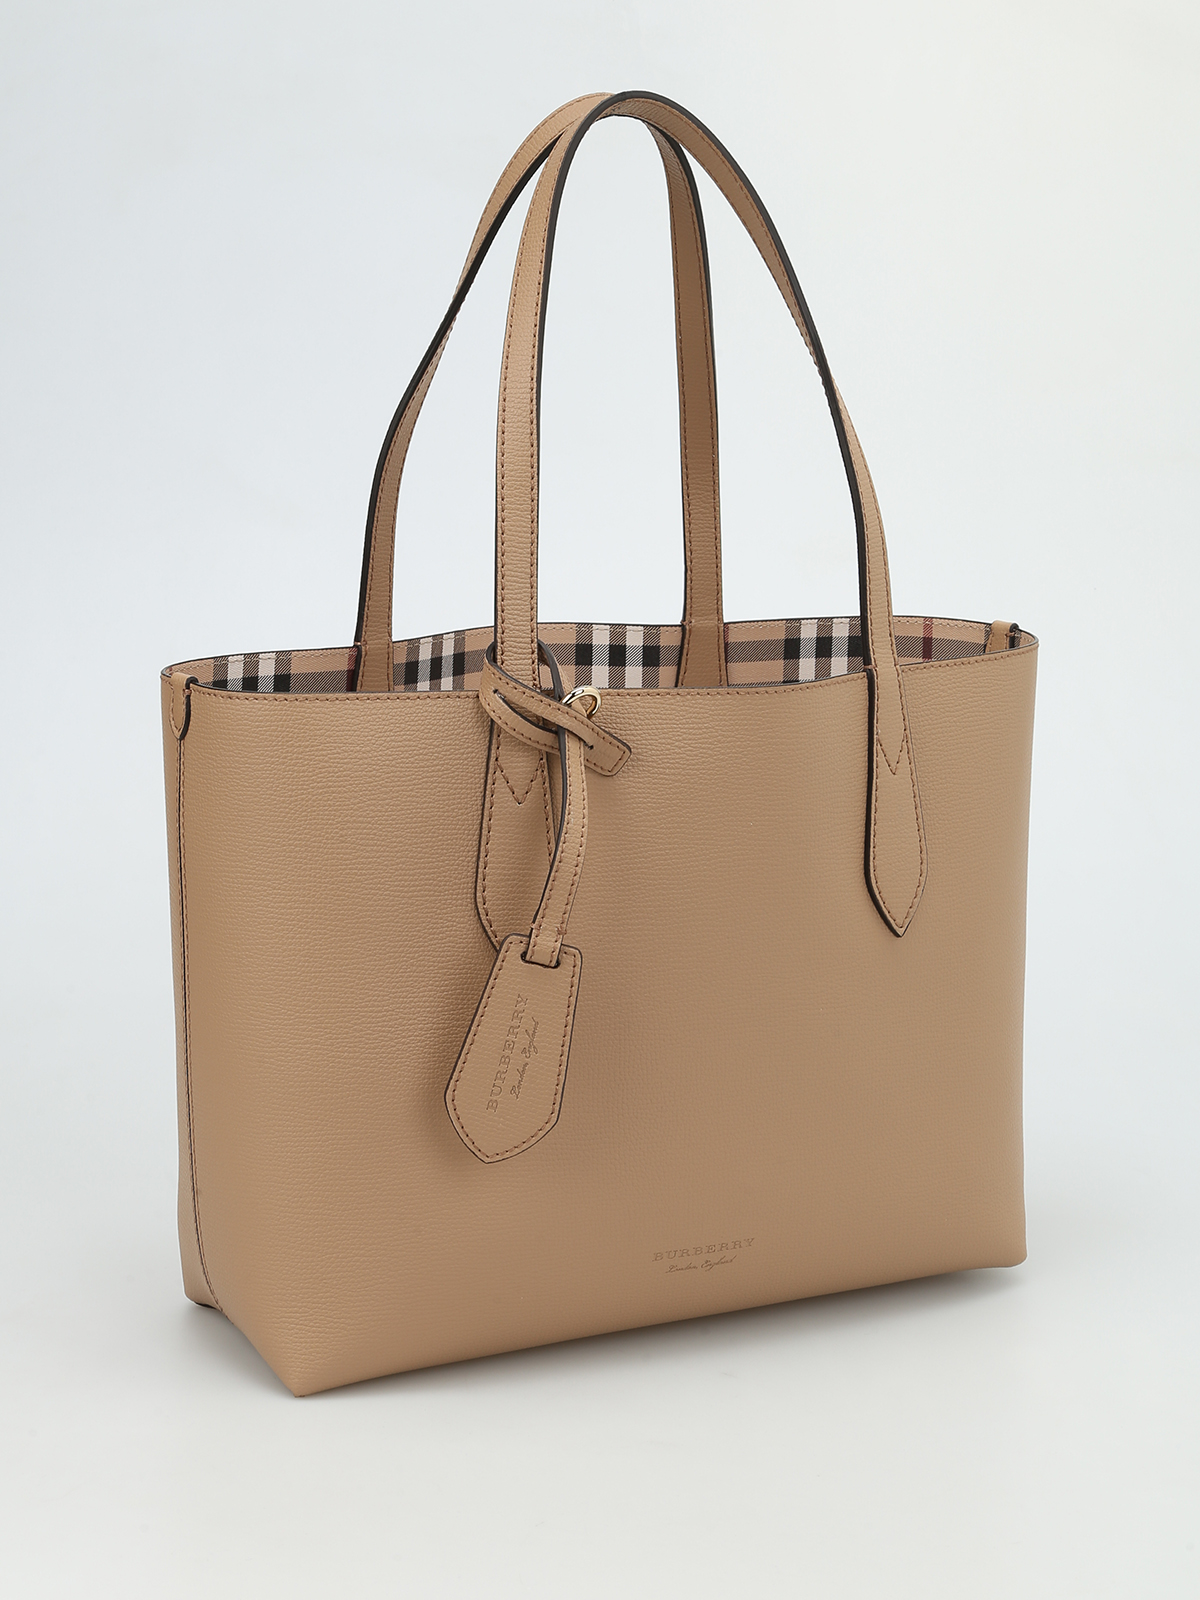 Haymarket check reversible tote by Burberry - totes bags | Shop online at www.bagsaleusa.com/product-category/neonoe-bag/